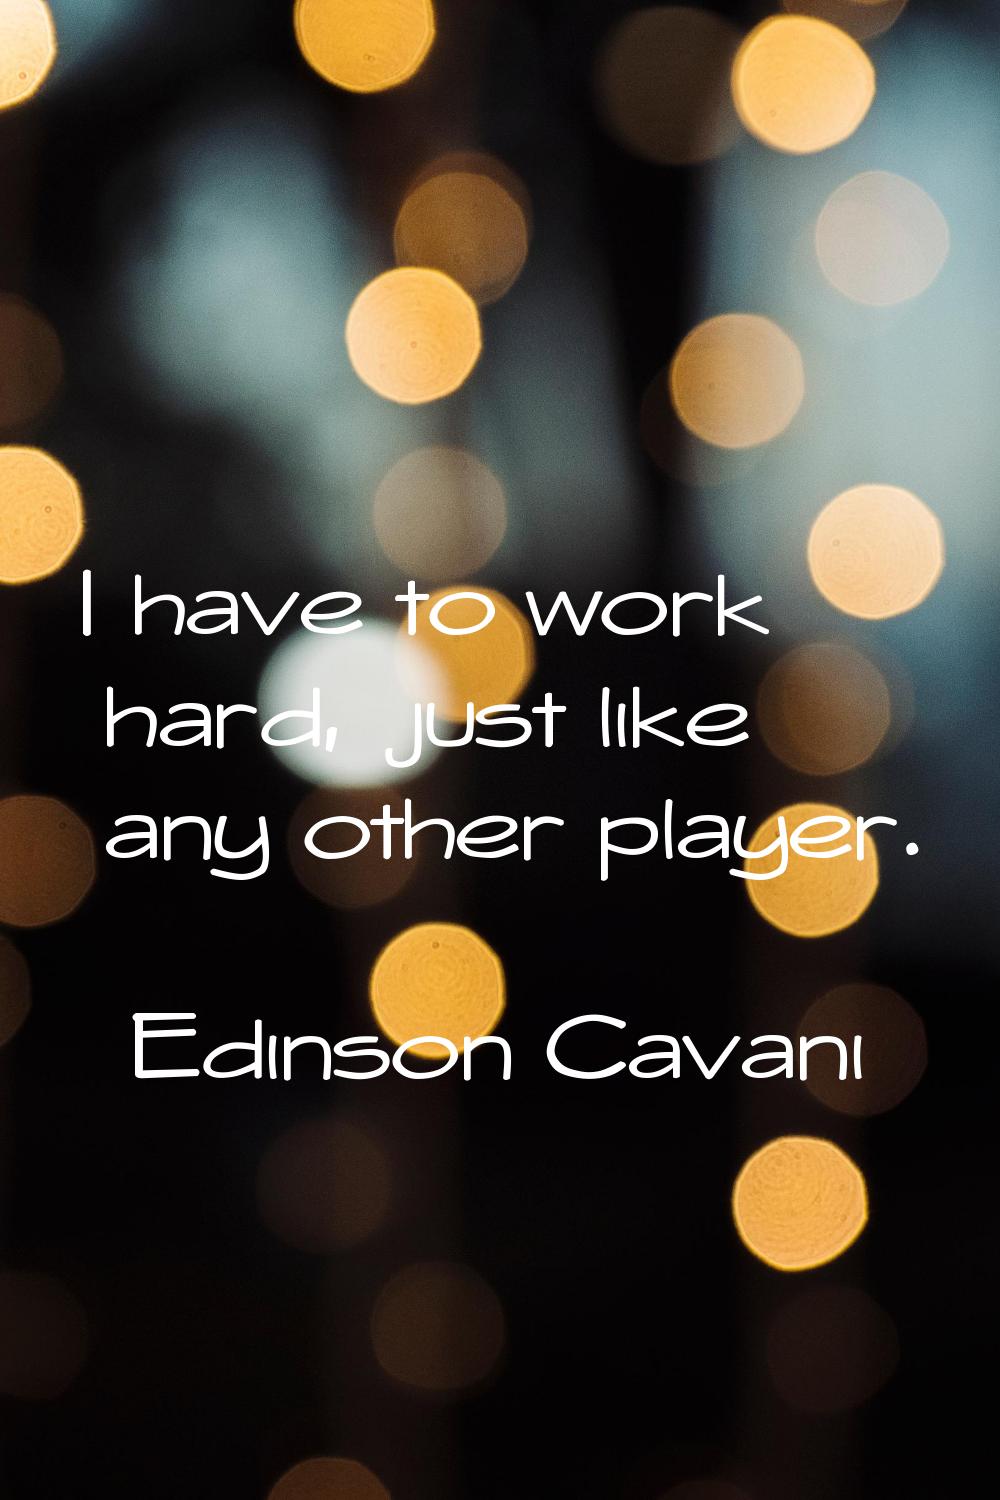 I have to work hard, just like any other player.